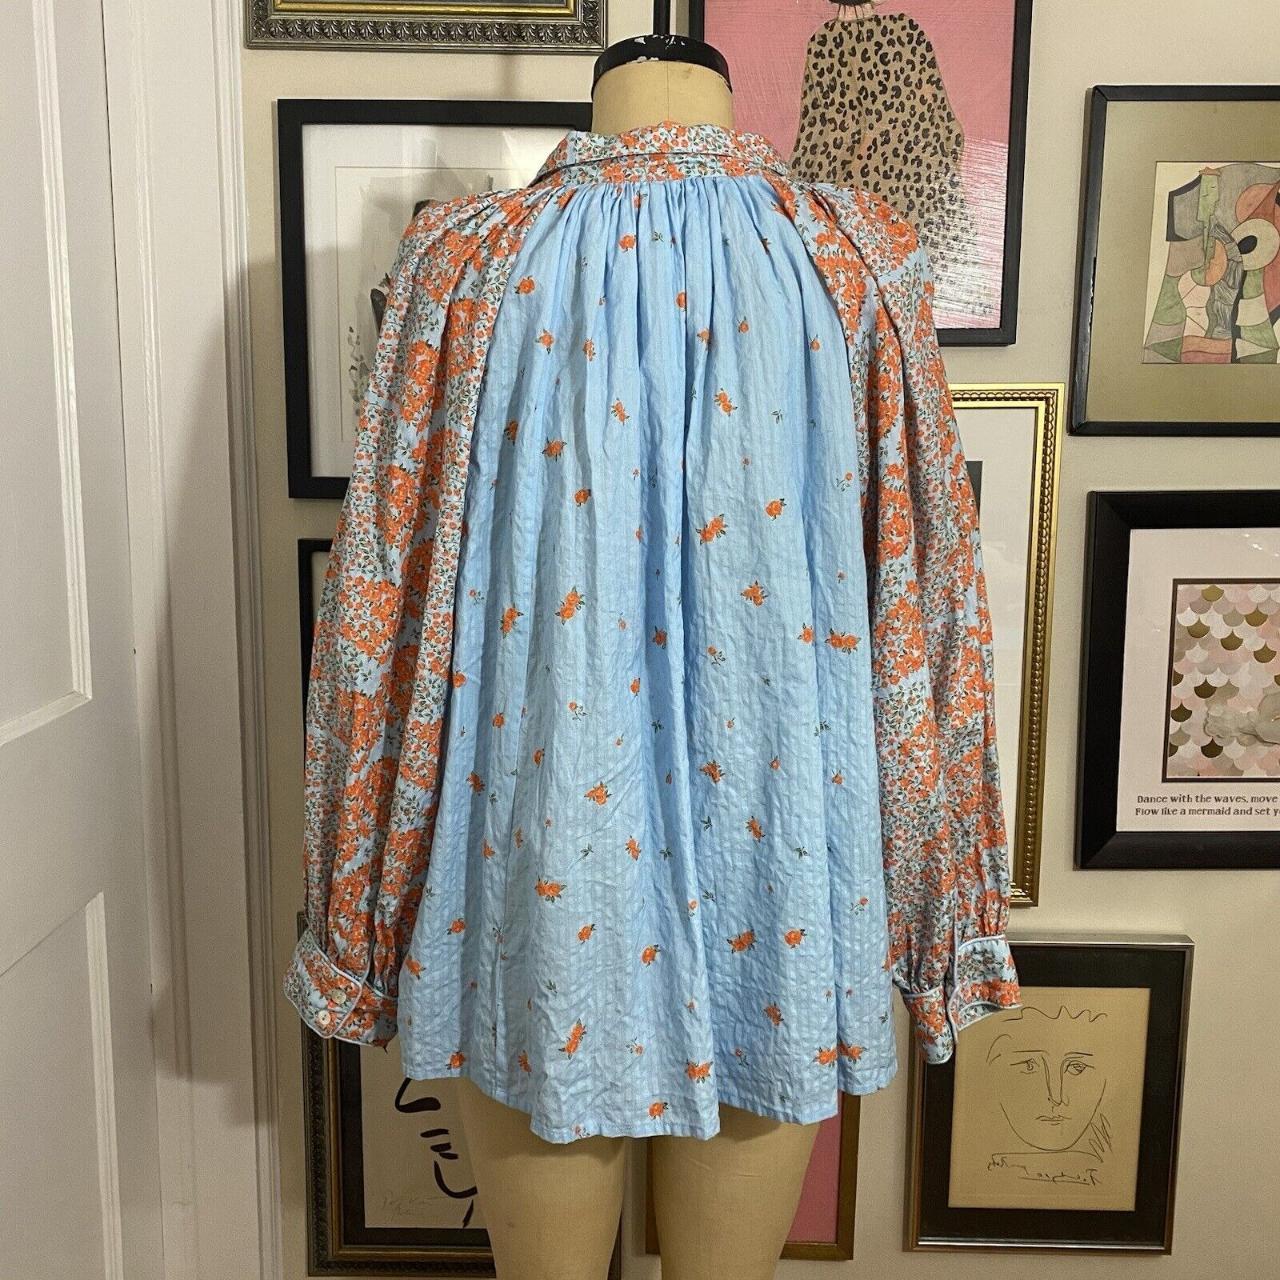 Roller Rabbit blouse in size XL. light blue with... - Depop